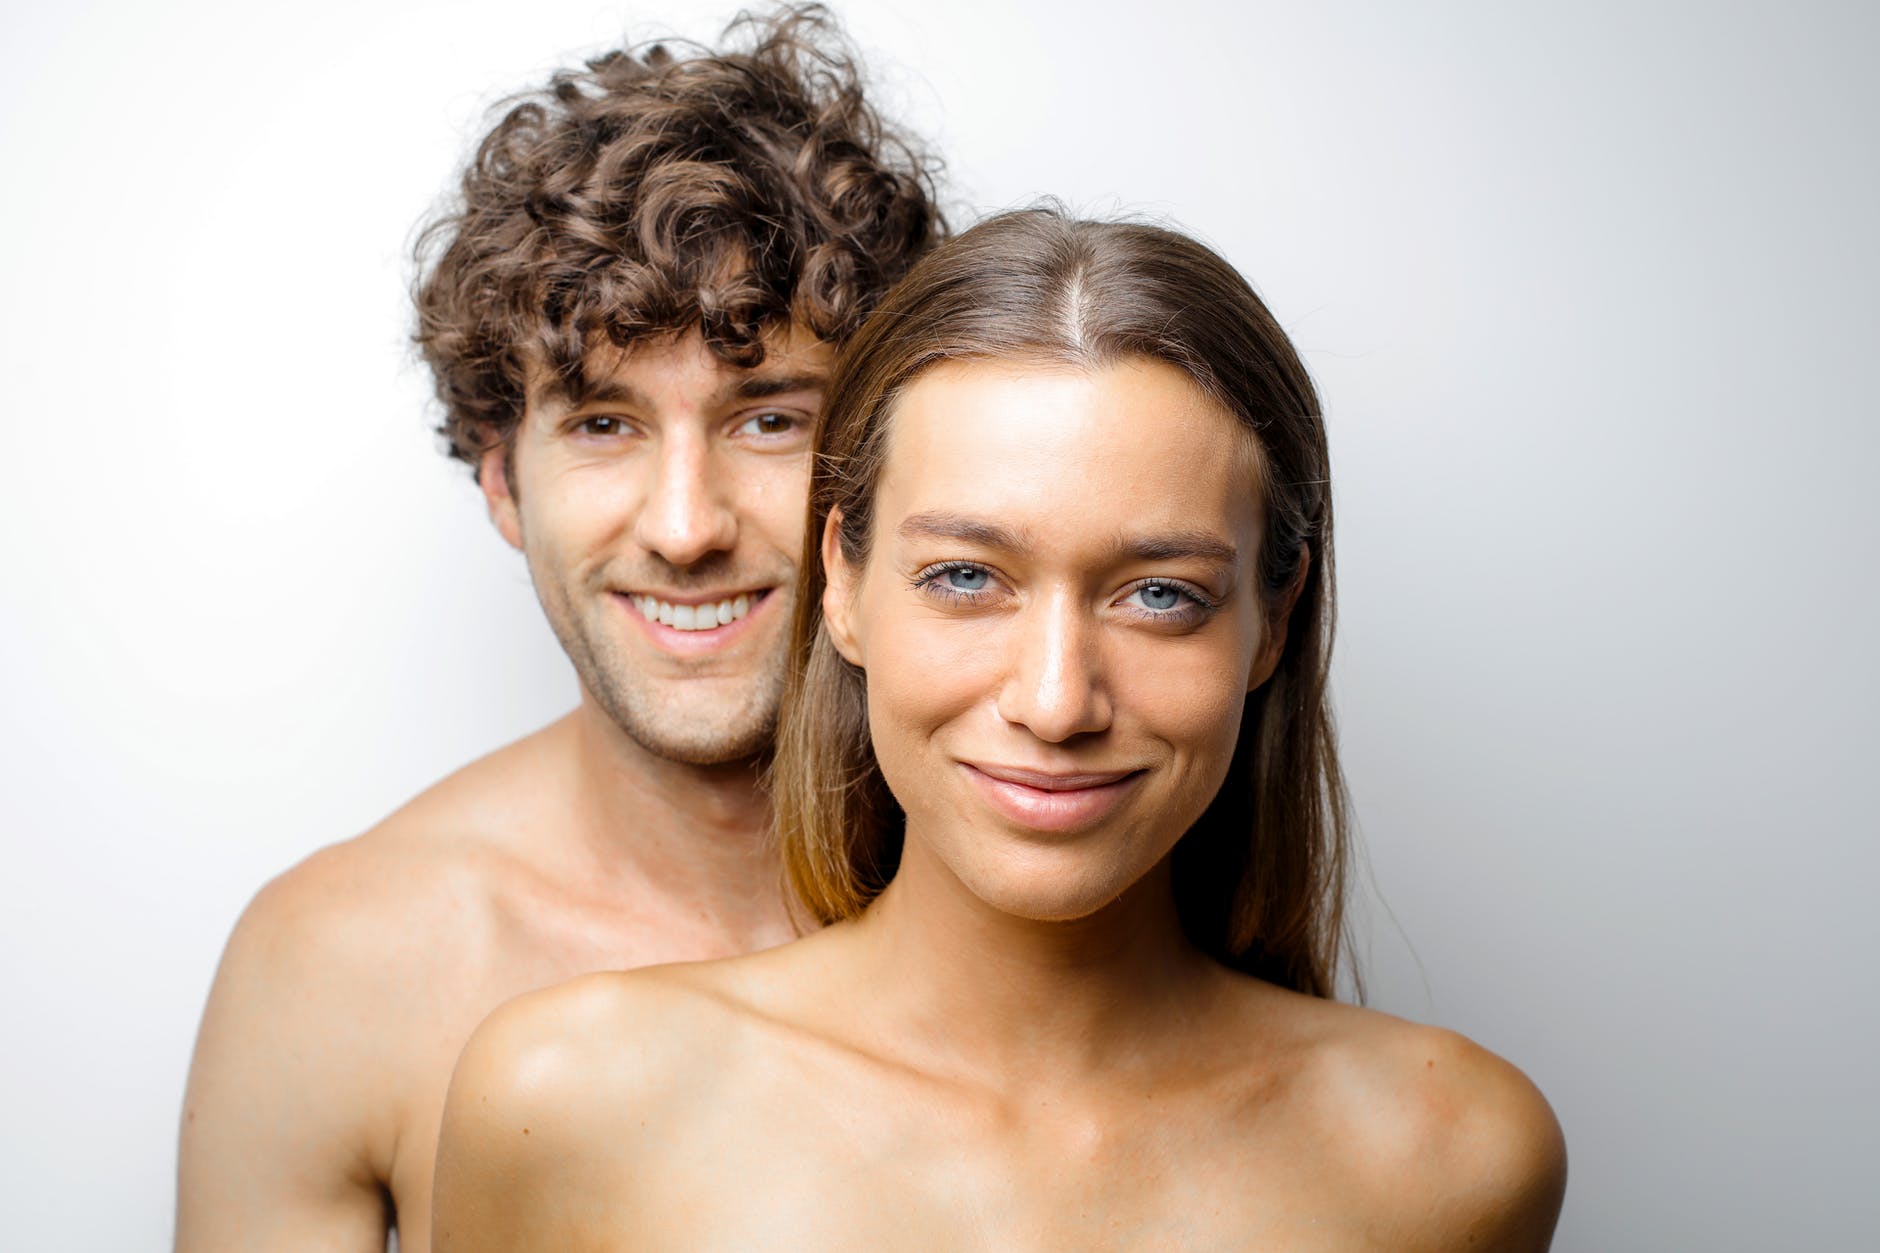 topless woman beside smiling man